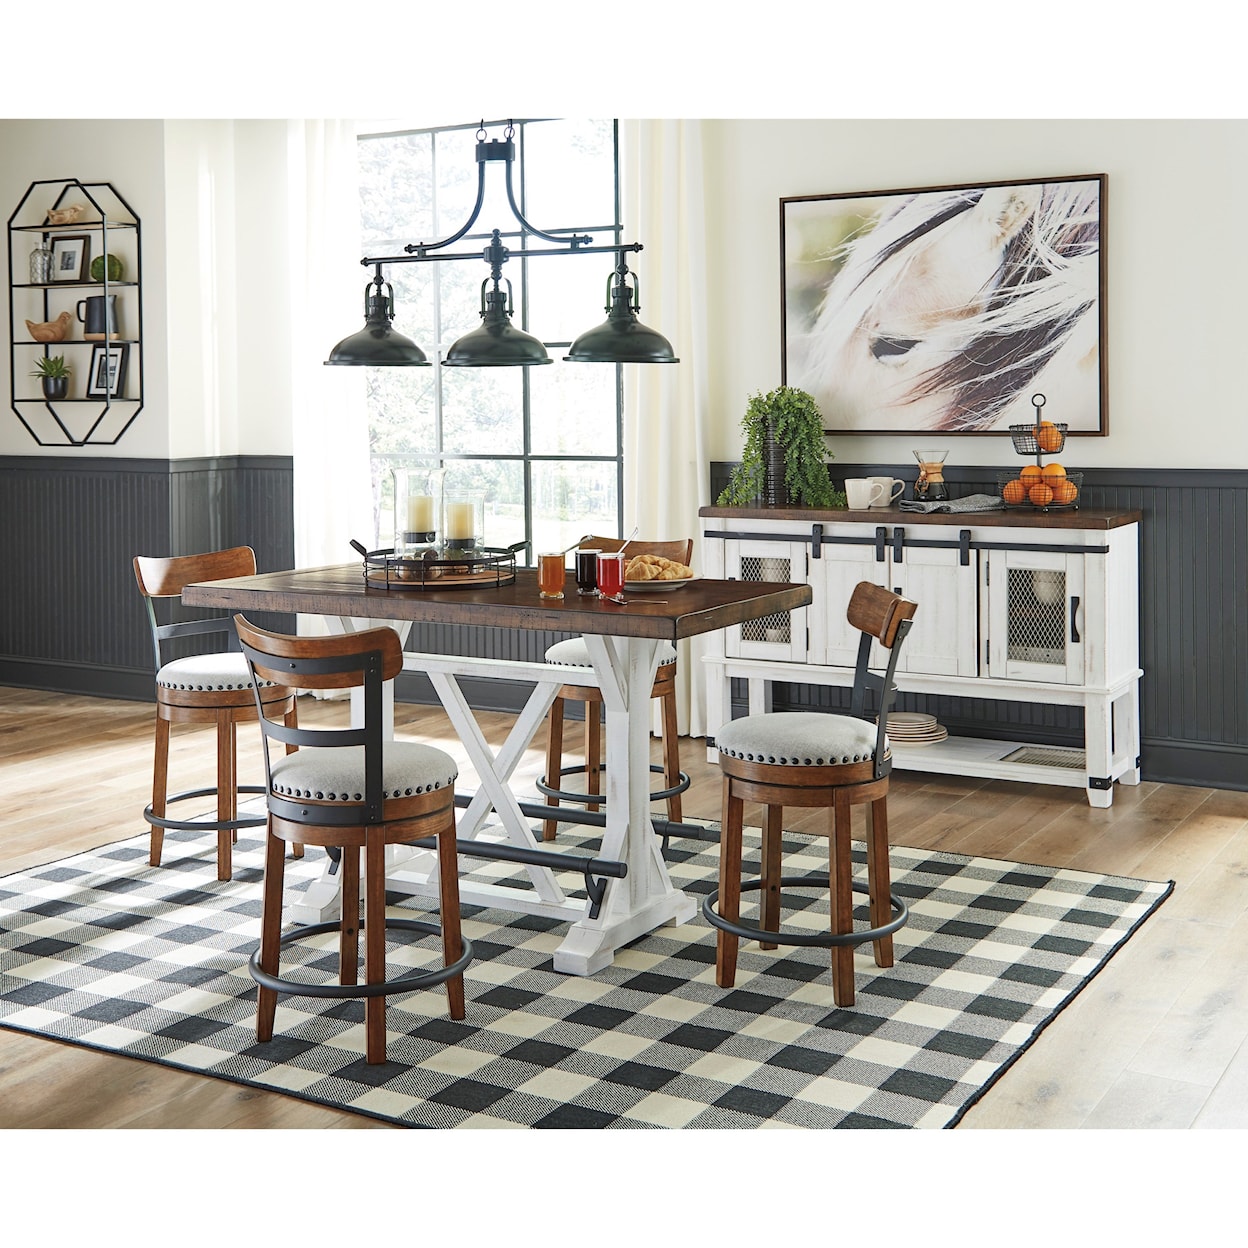 Signature Design by Ashley Furniture Valebeck Casual Dining Room Group